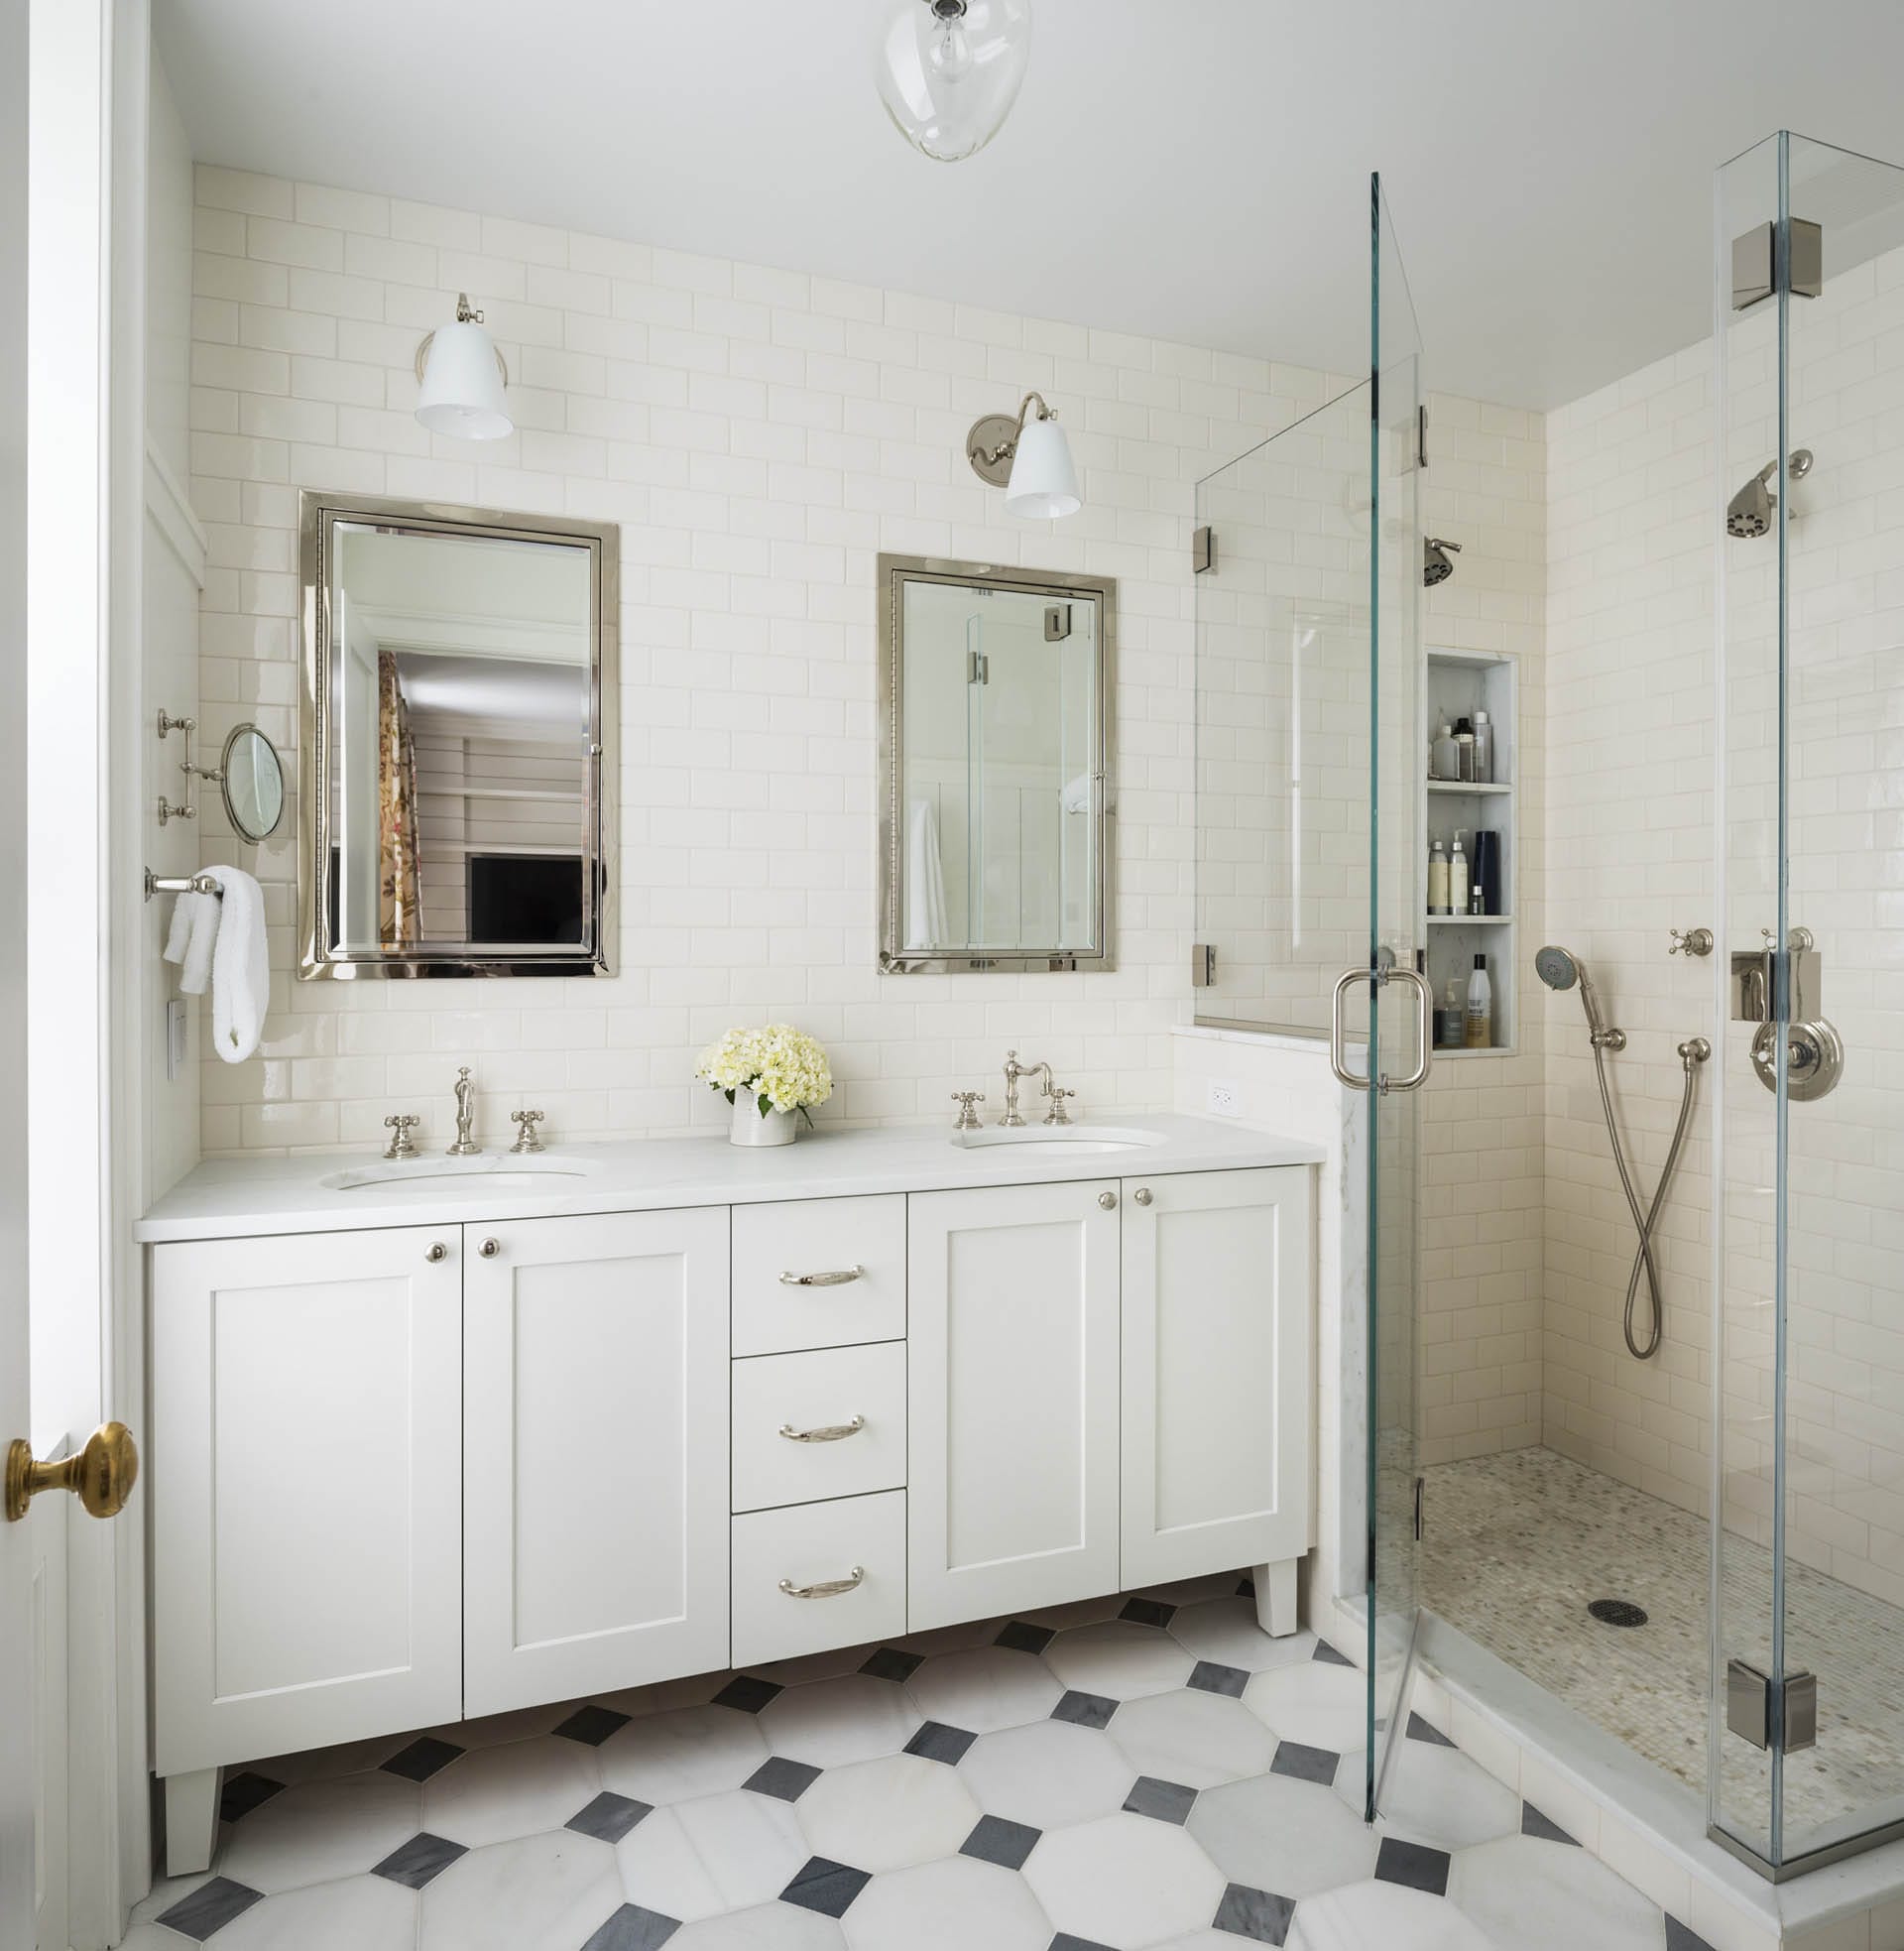 Primary bathroom with tiled floors, subway tiles on the wall, and a white Jack and Jill vanity